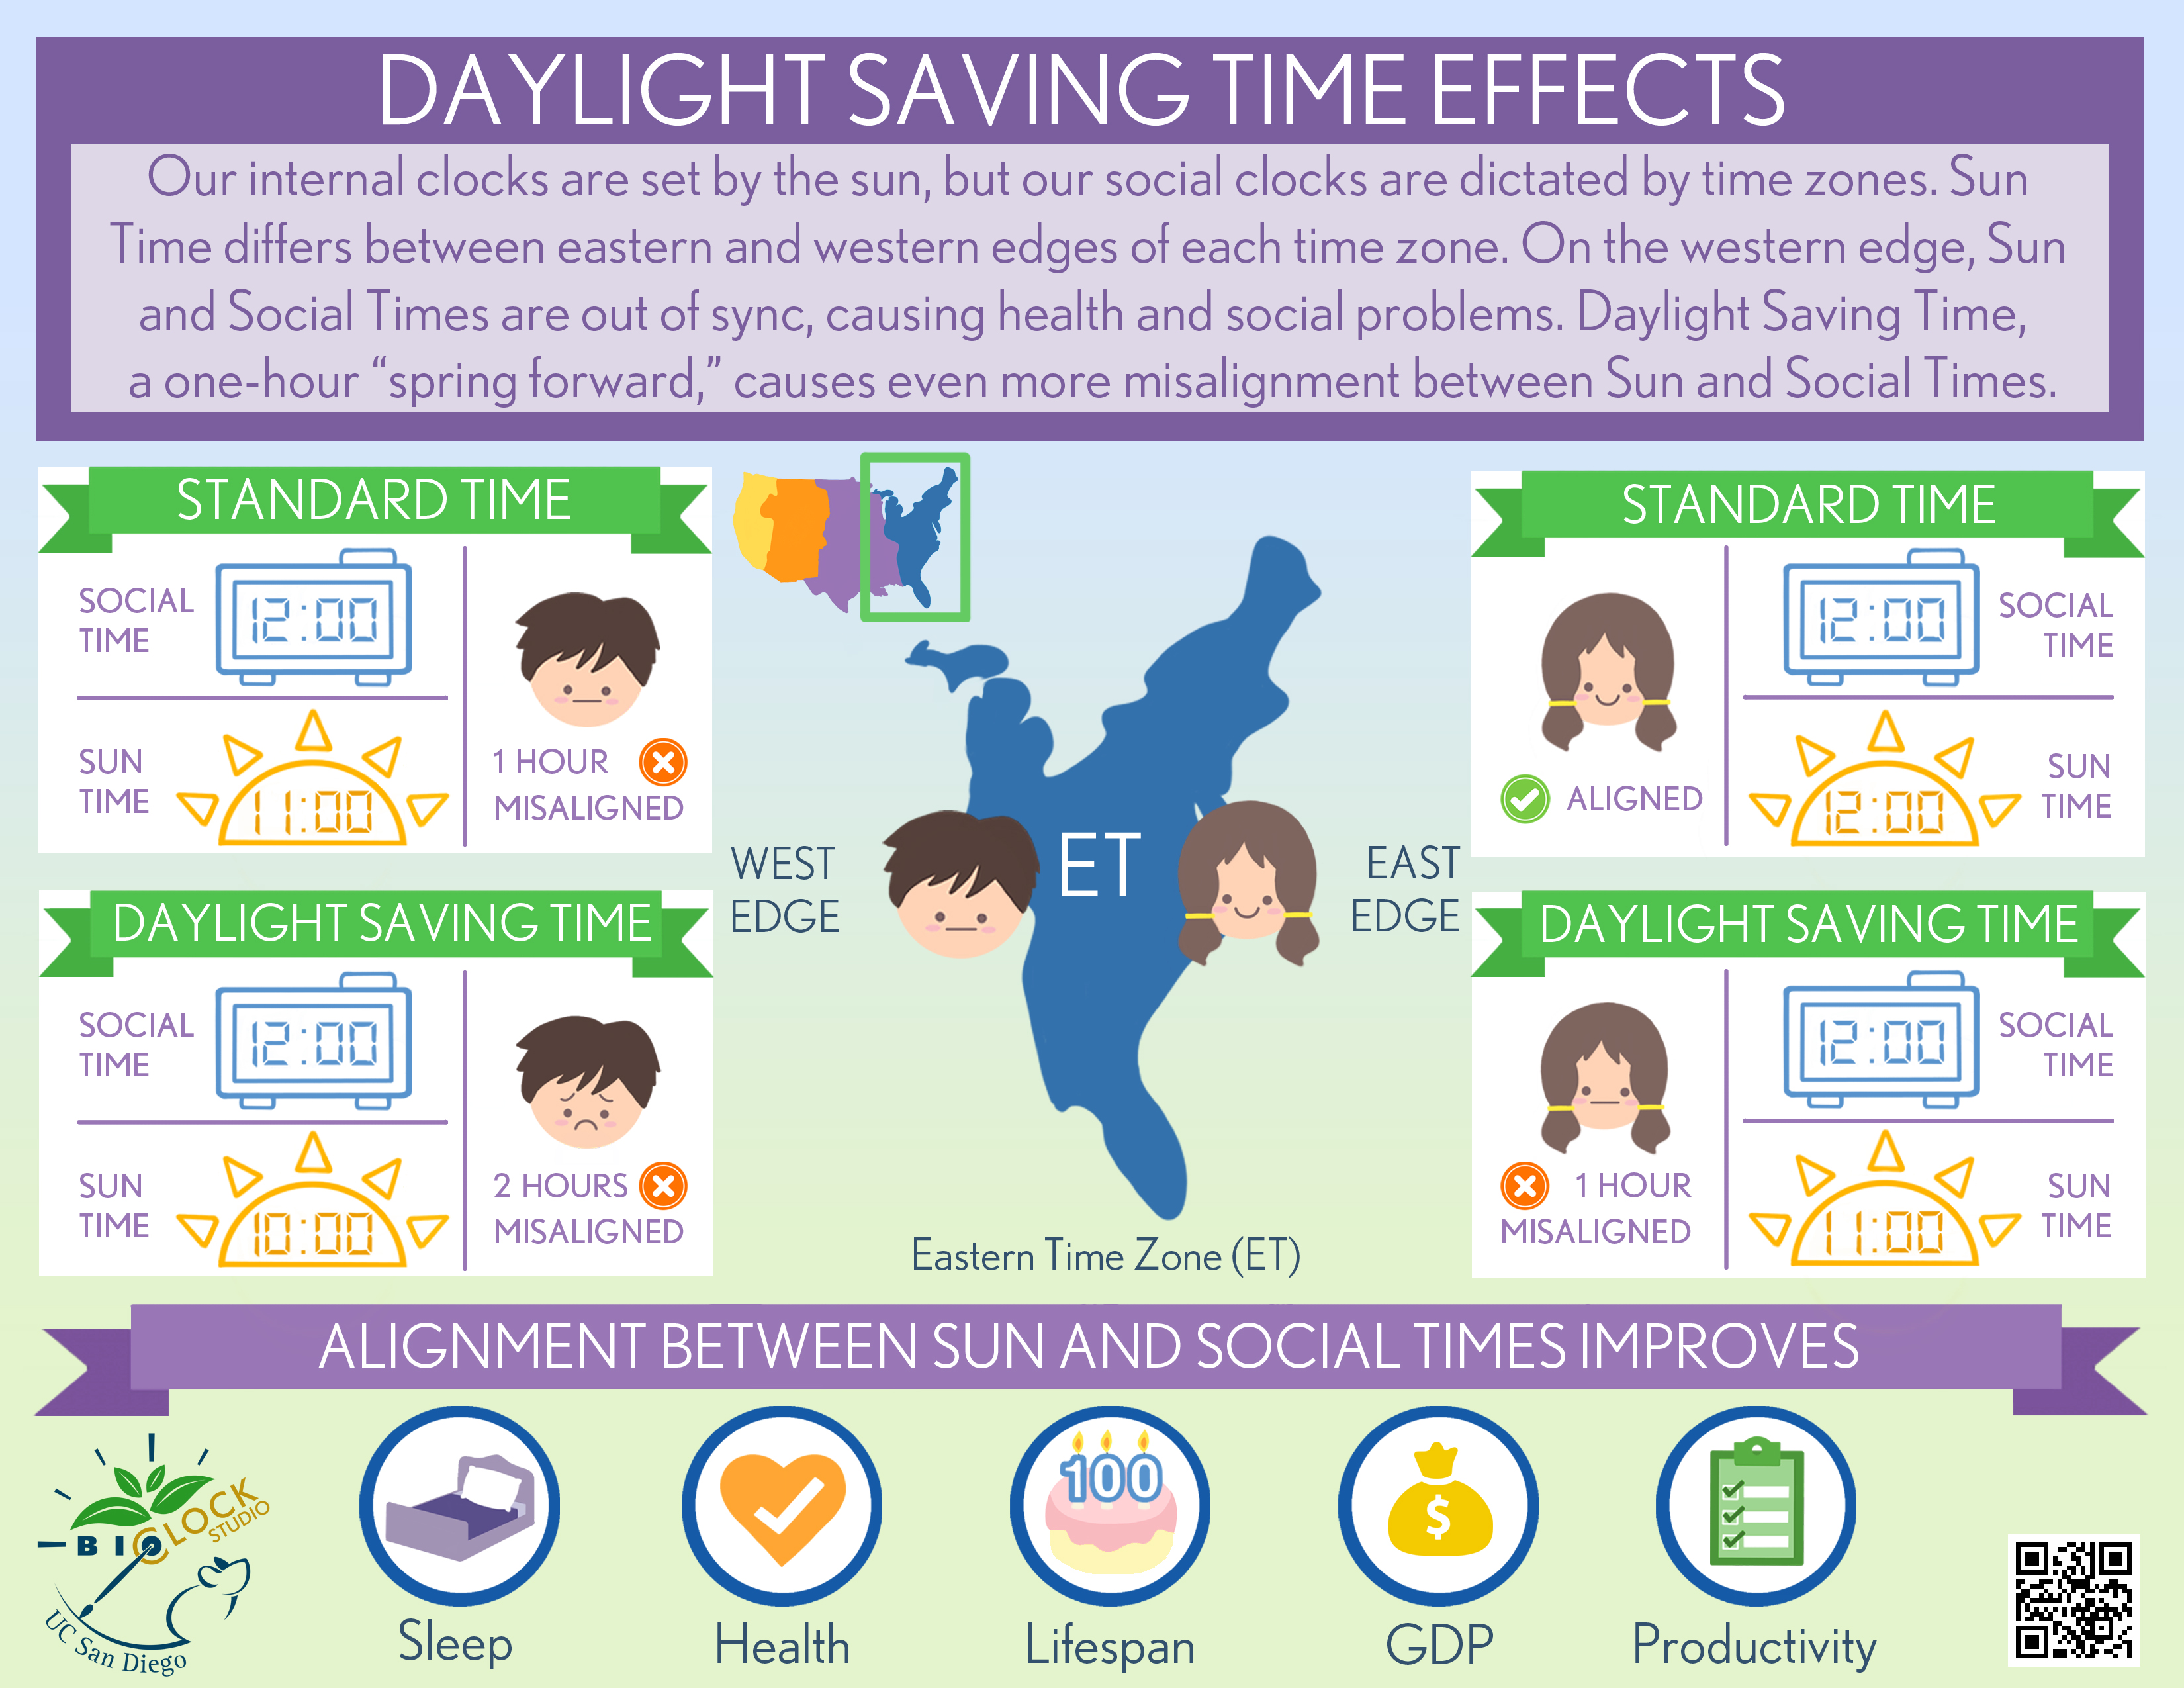 Daylight Saving Time, Definition, History, & Facts